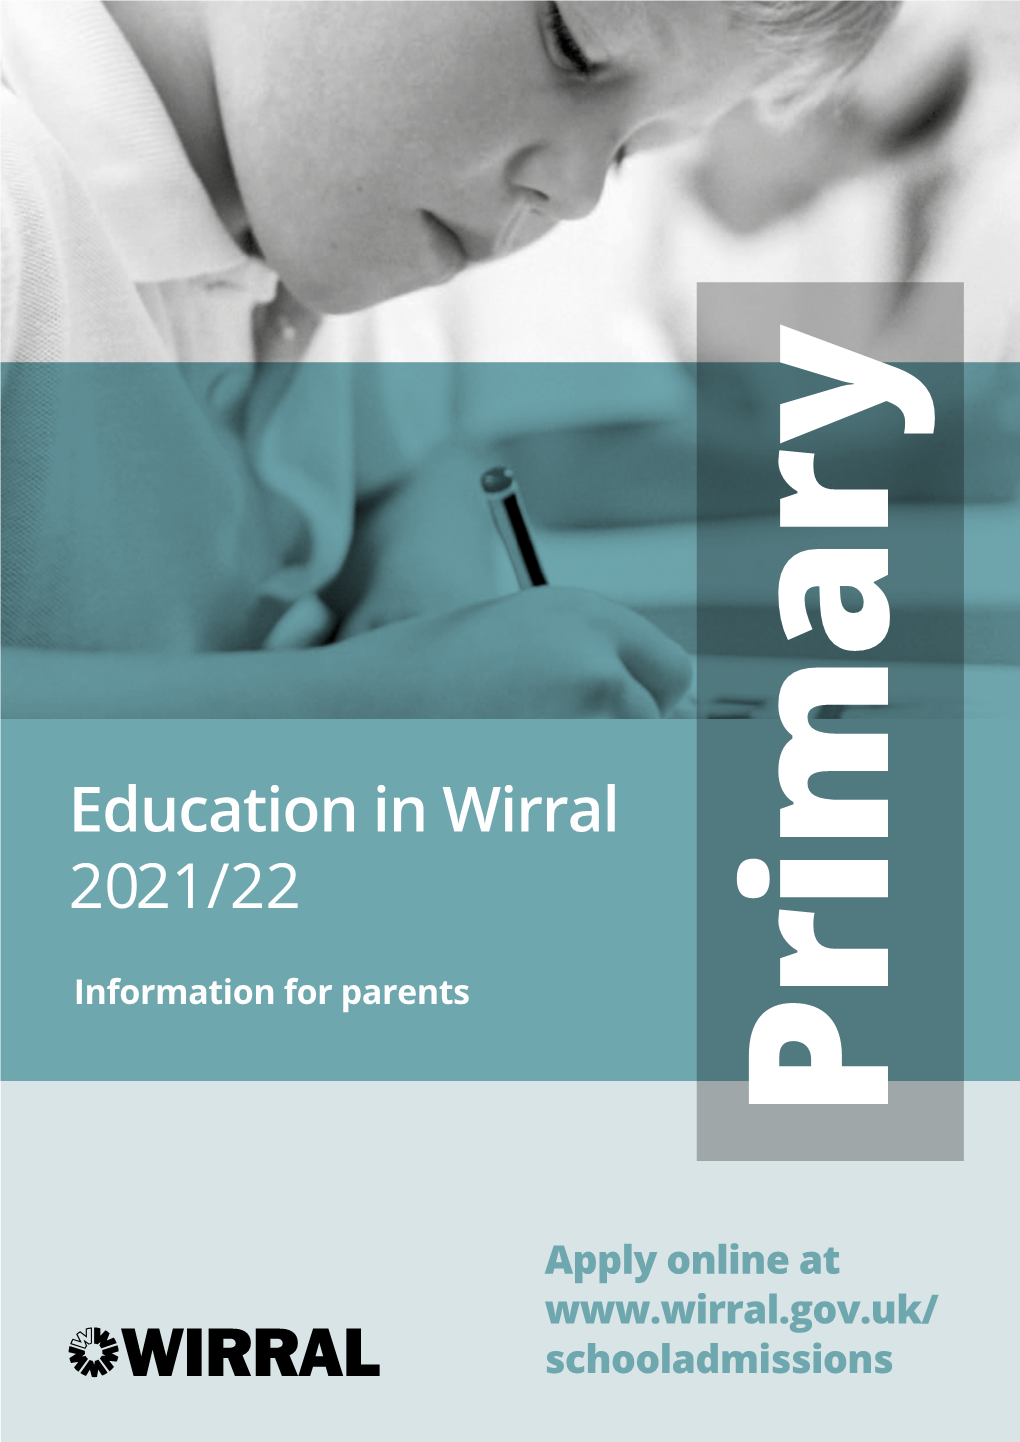 Primary School Information for Parents